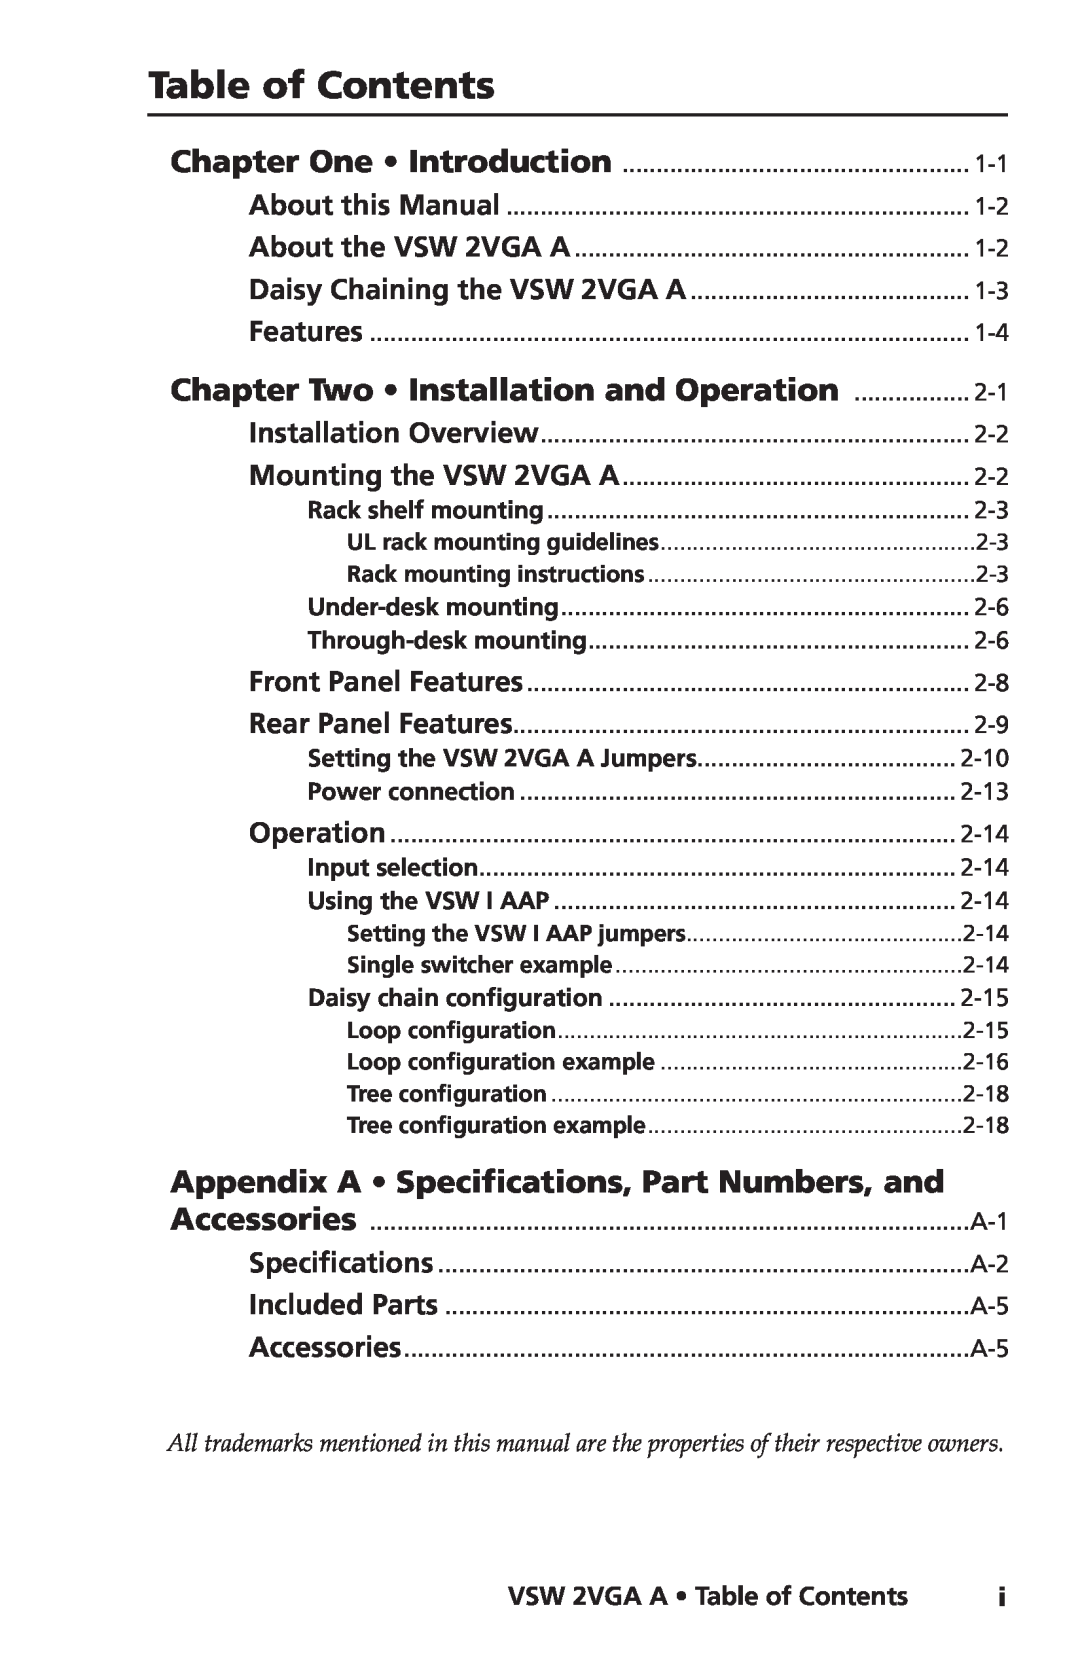 Extron electronic user manual Chapter Two Installation and Operation, VSW 2VGA A Table of Contents 